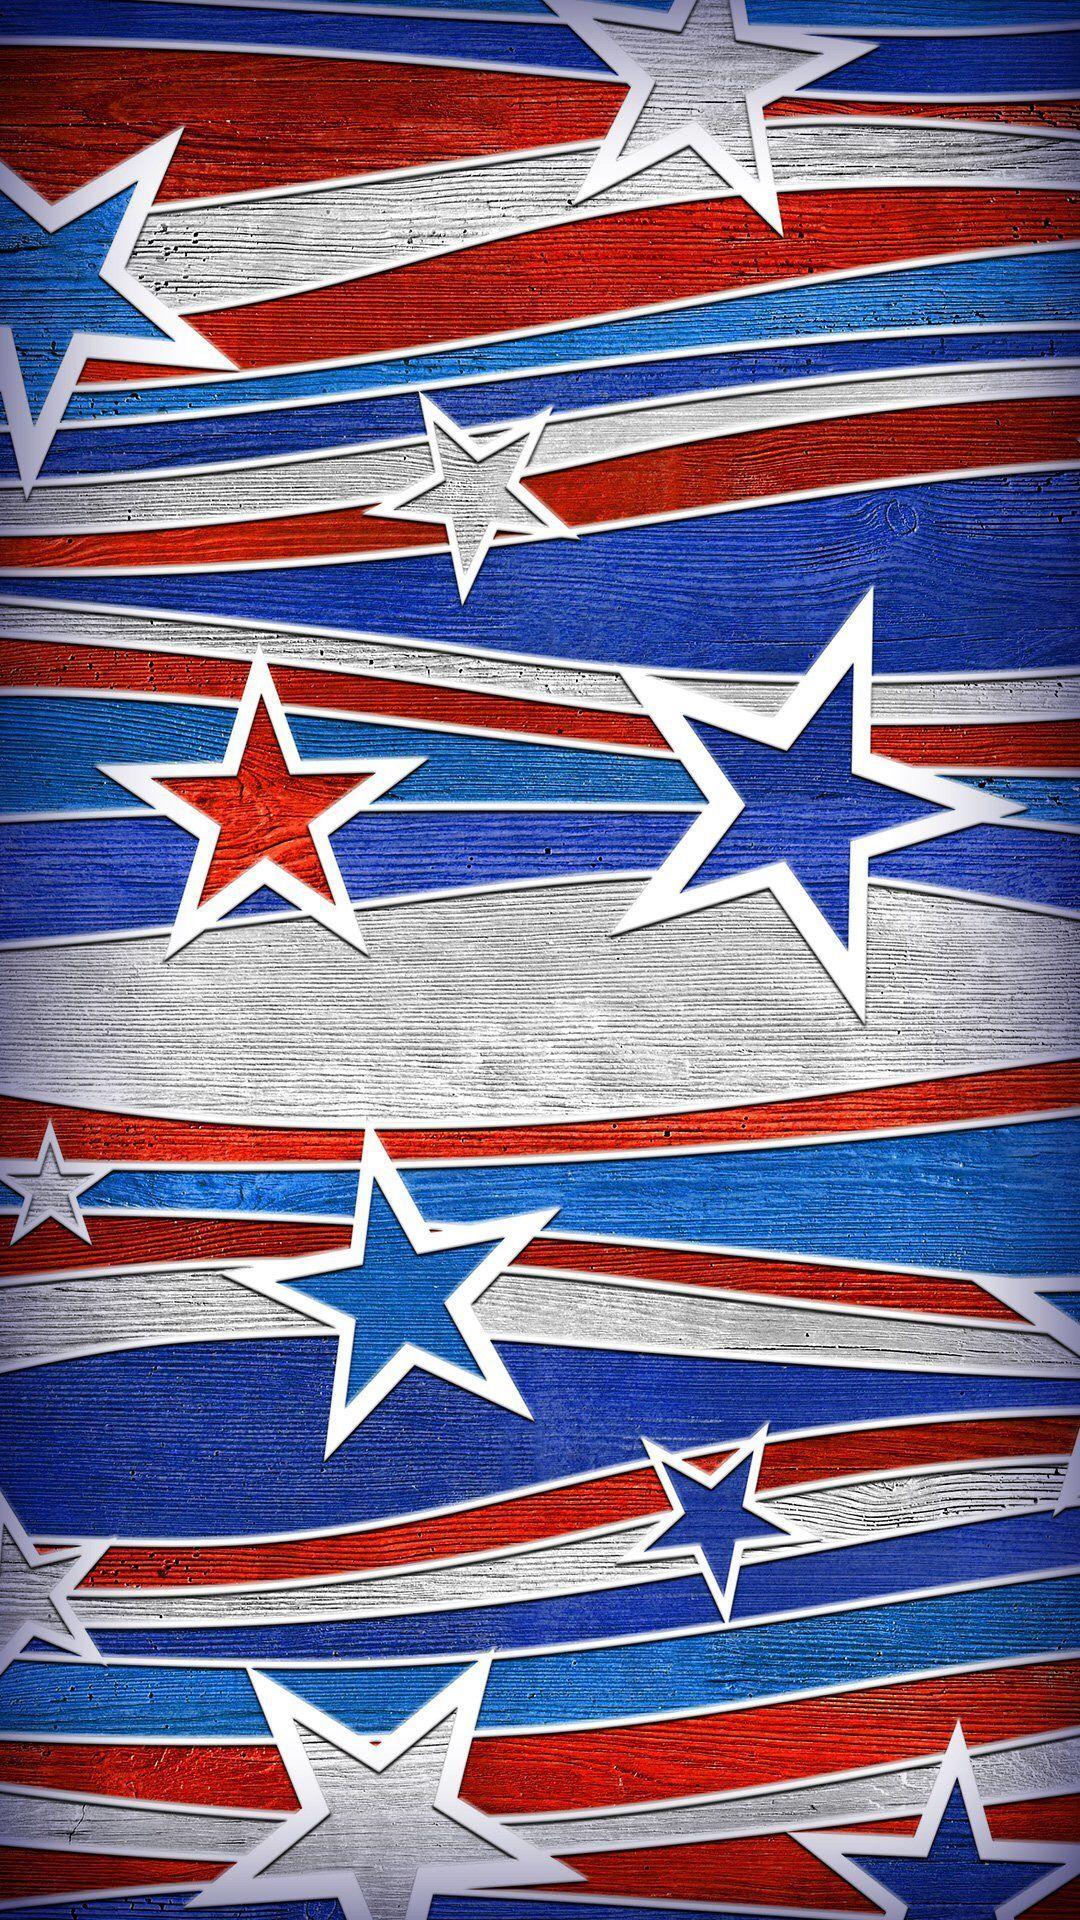 Confederate Flag wallpaper in 360x720 resolution